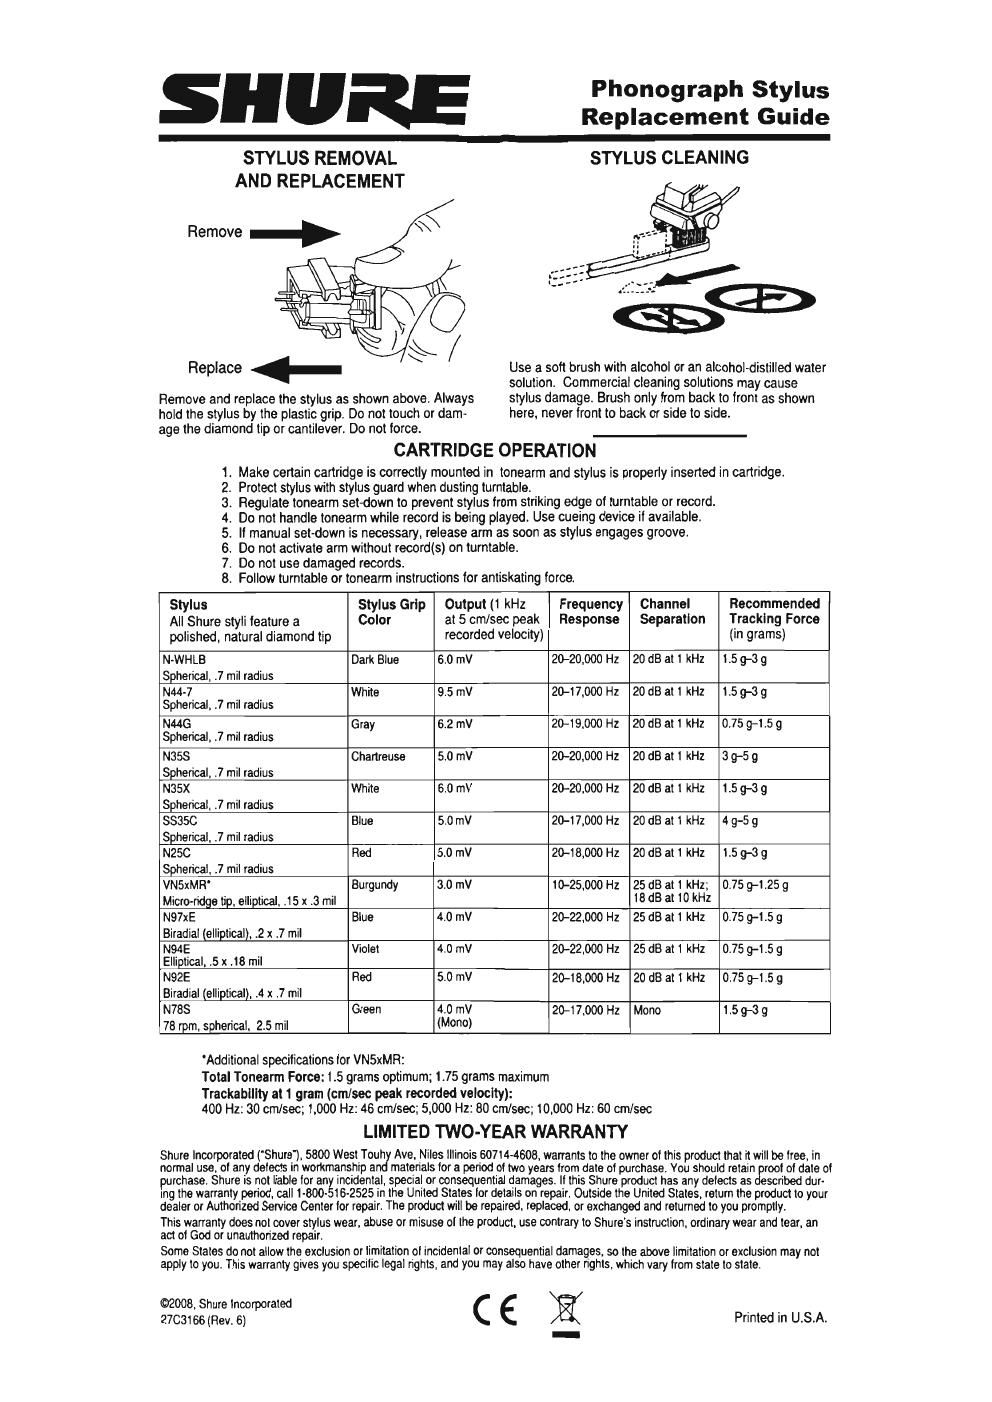 shure stylus replacement guide 2008